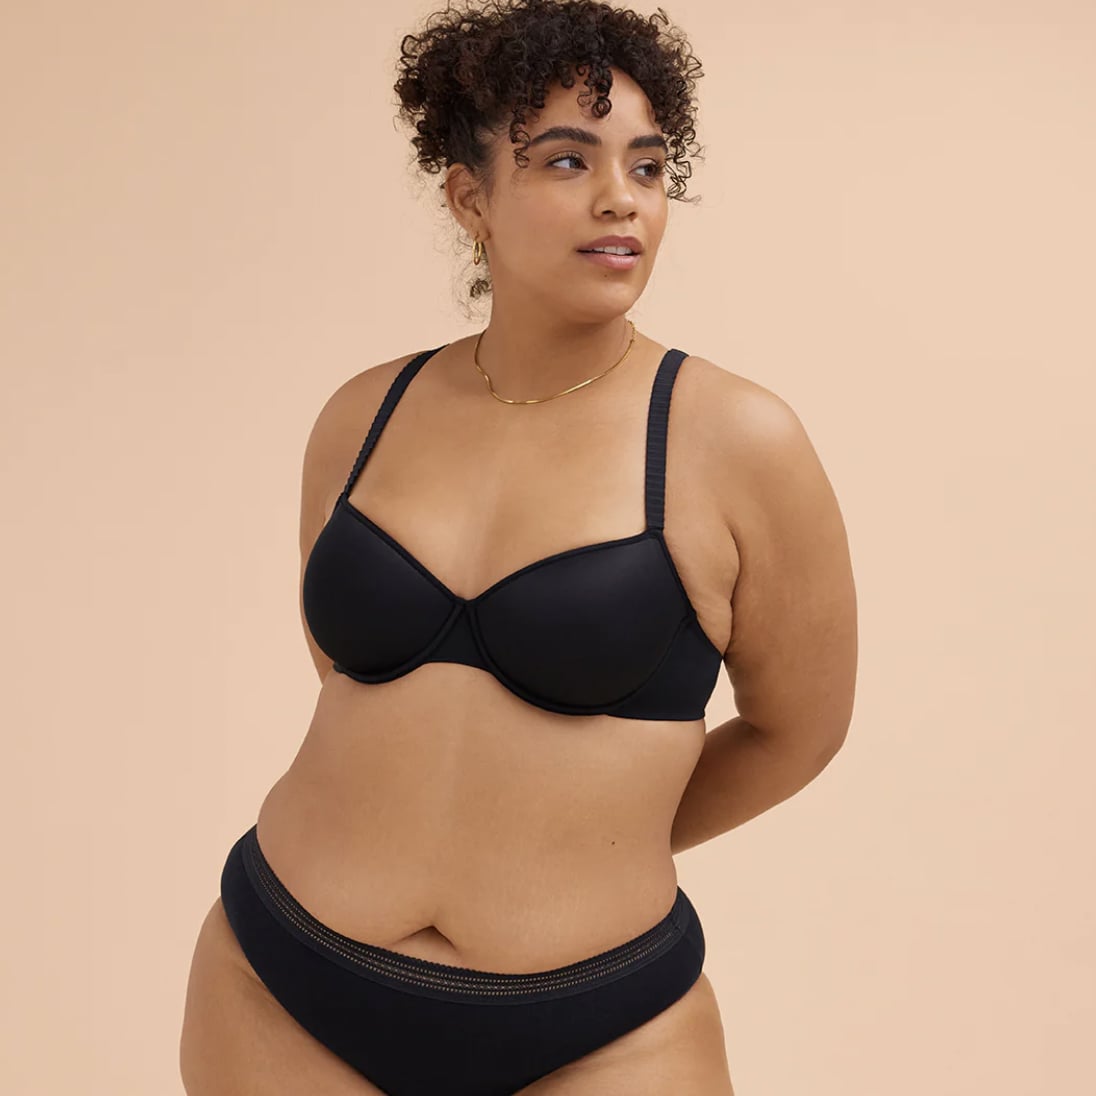 p a c t - Organic cotton undies because you and your body